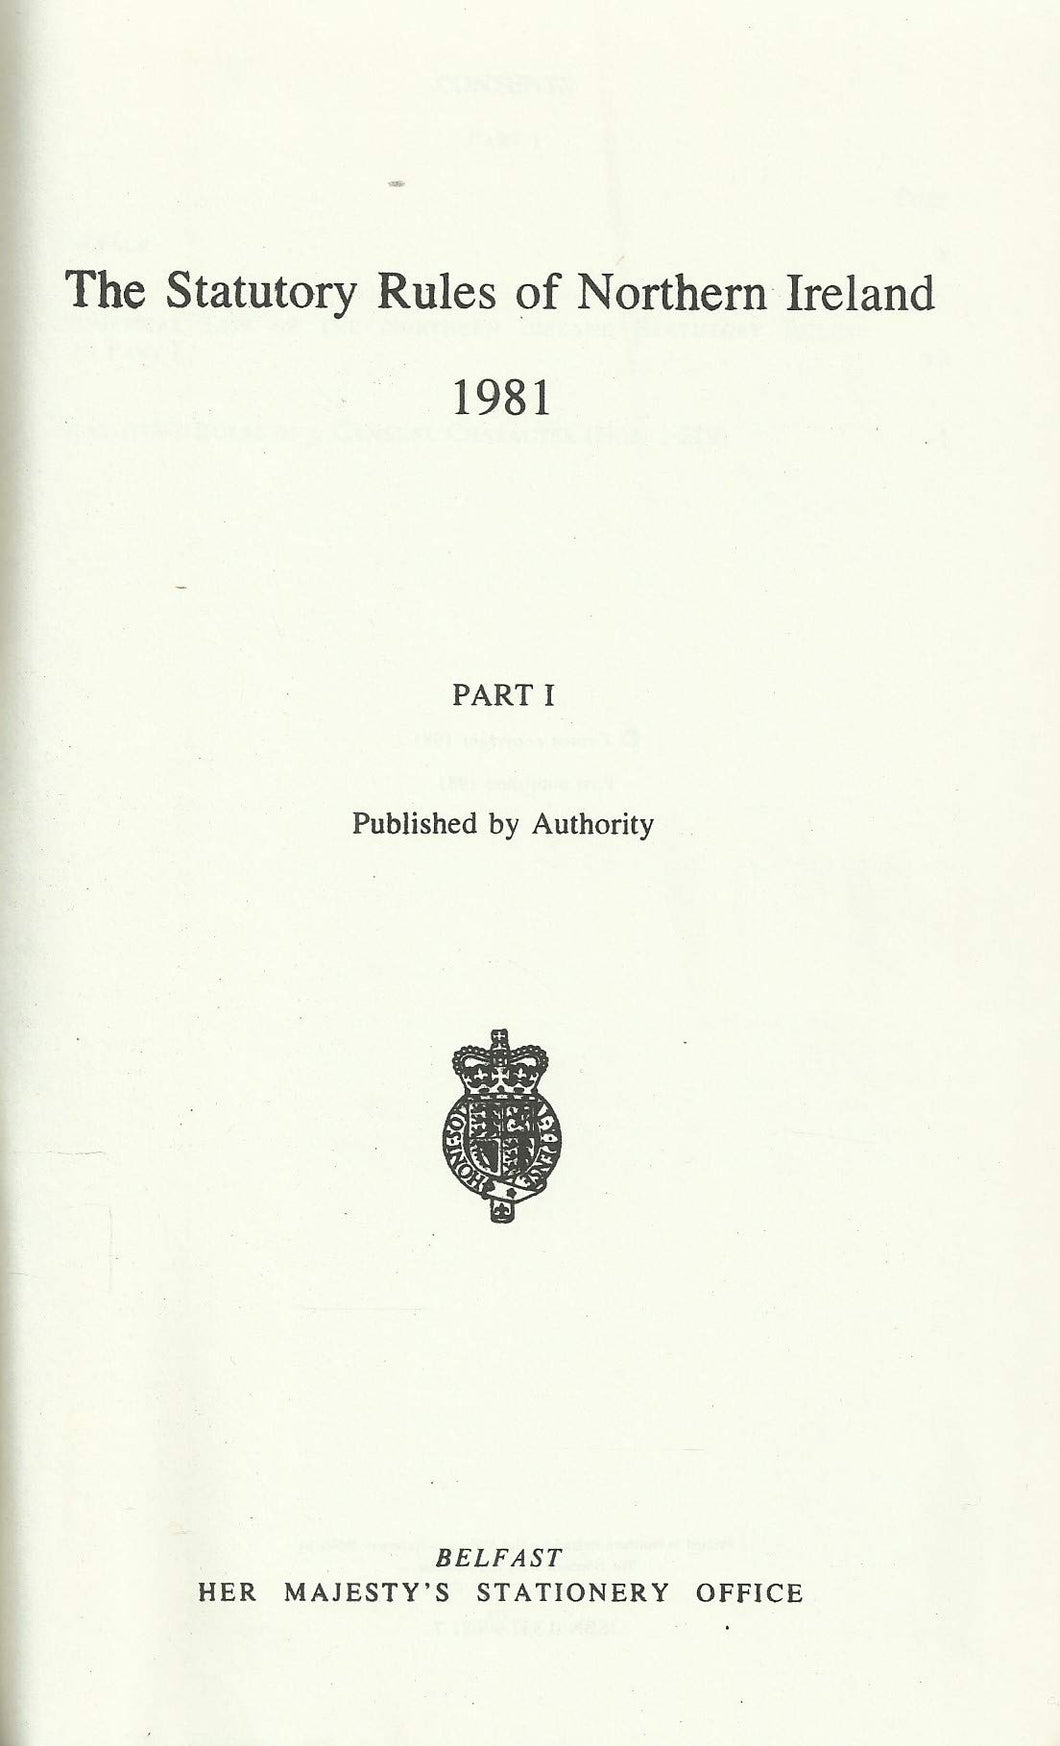 The Statutory Rules of Northern Ireland: 1981 Part 1 nos